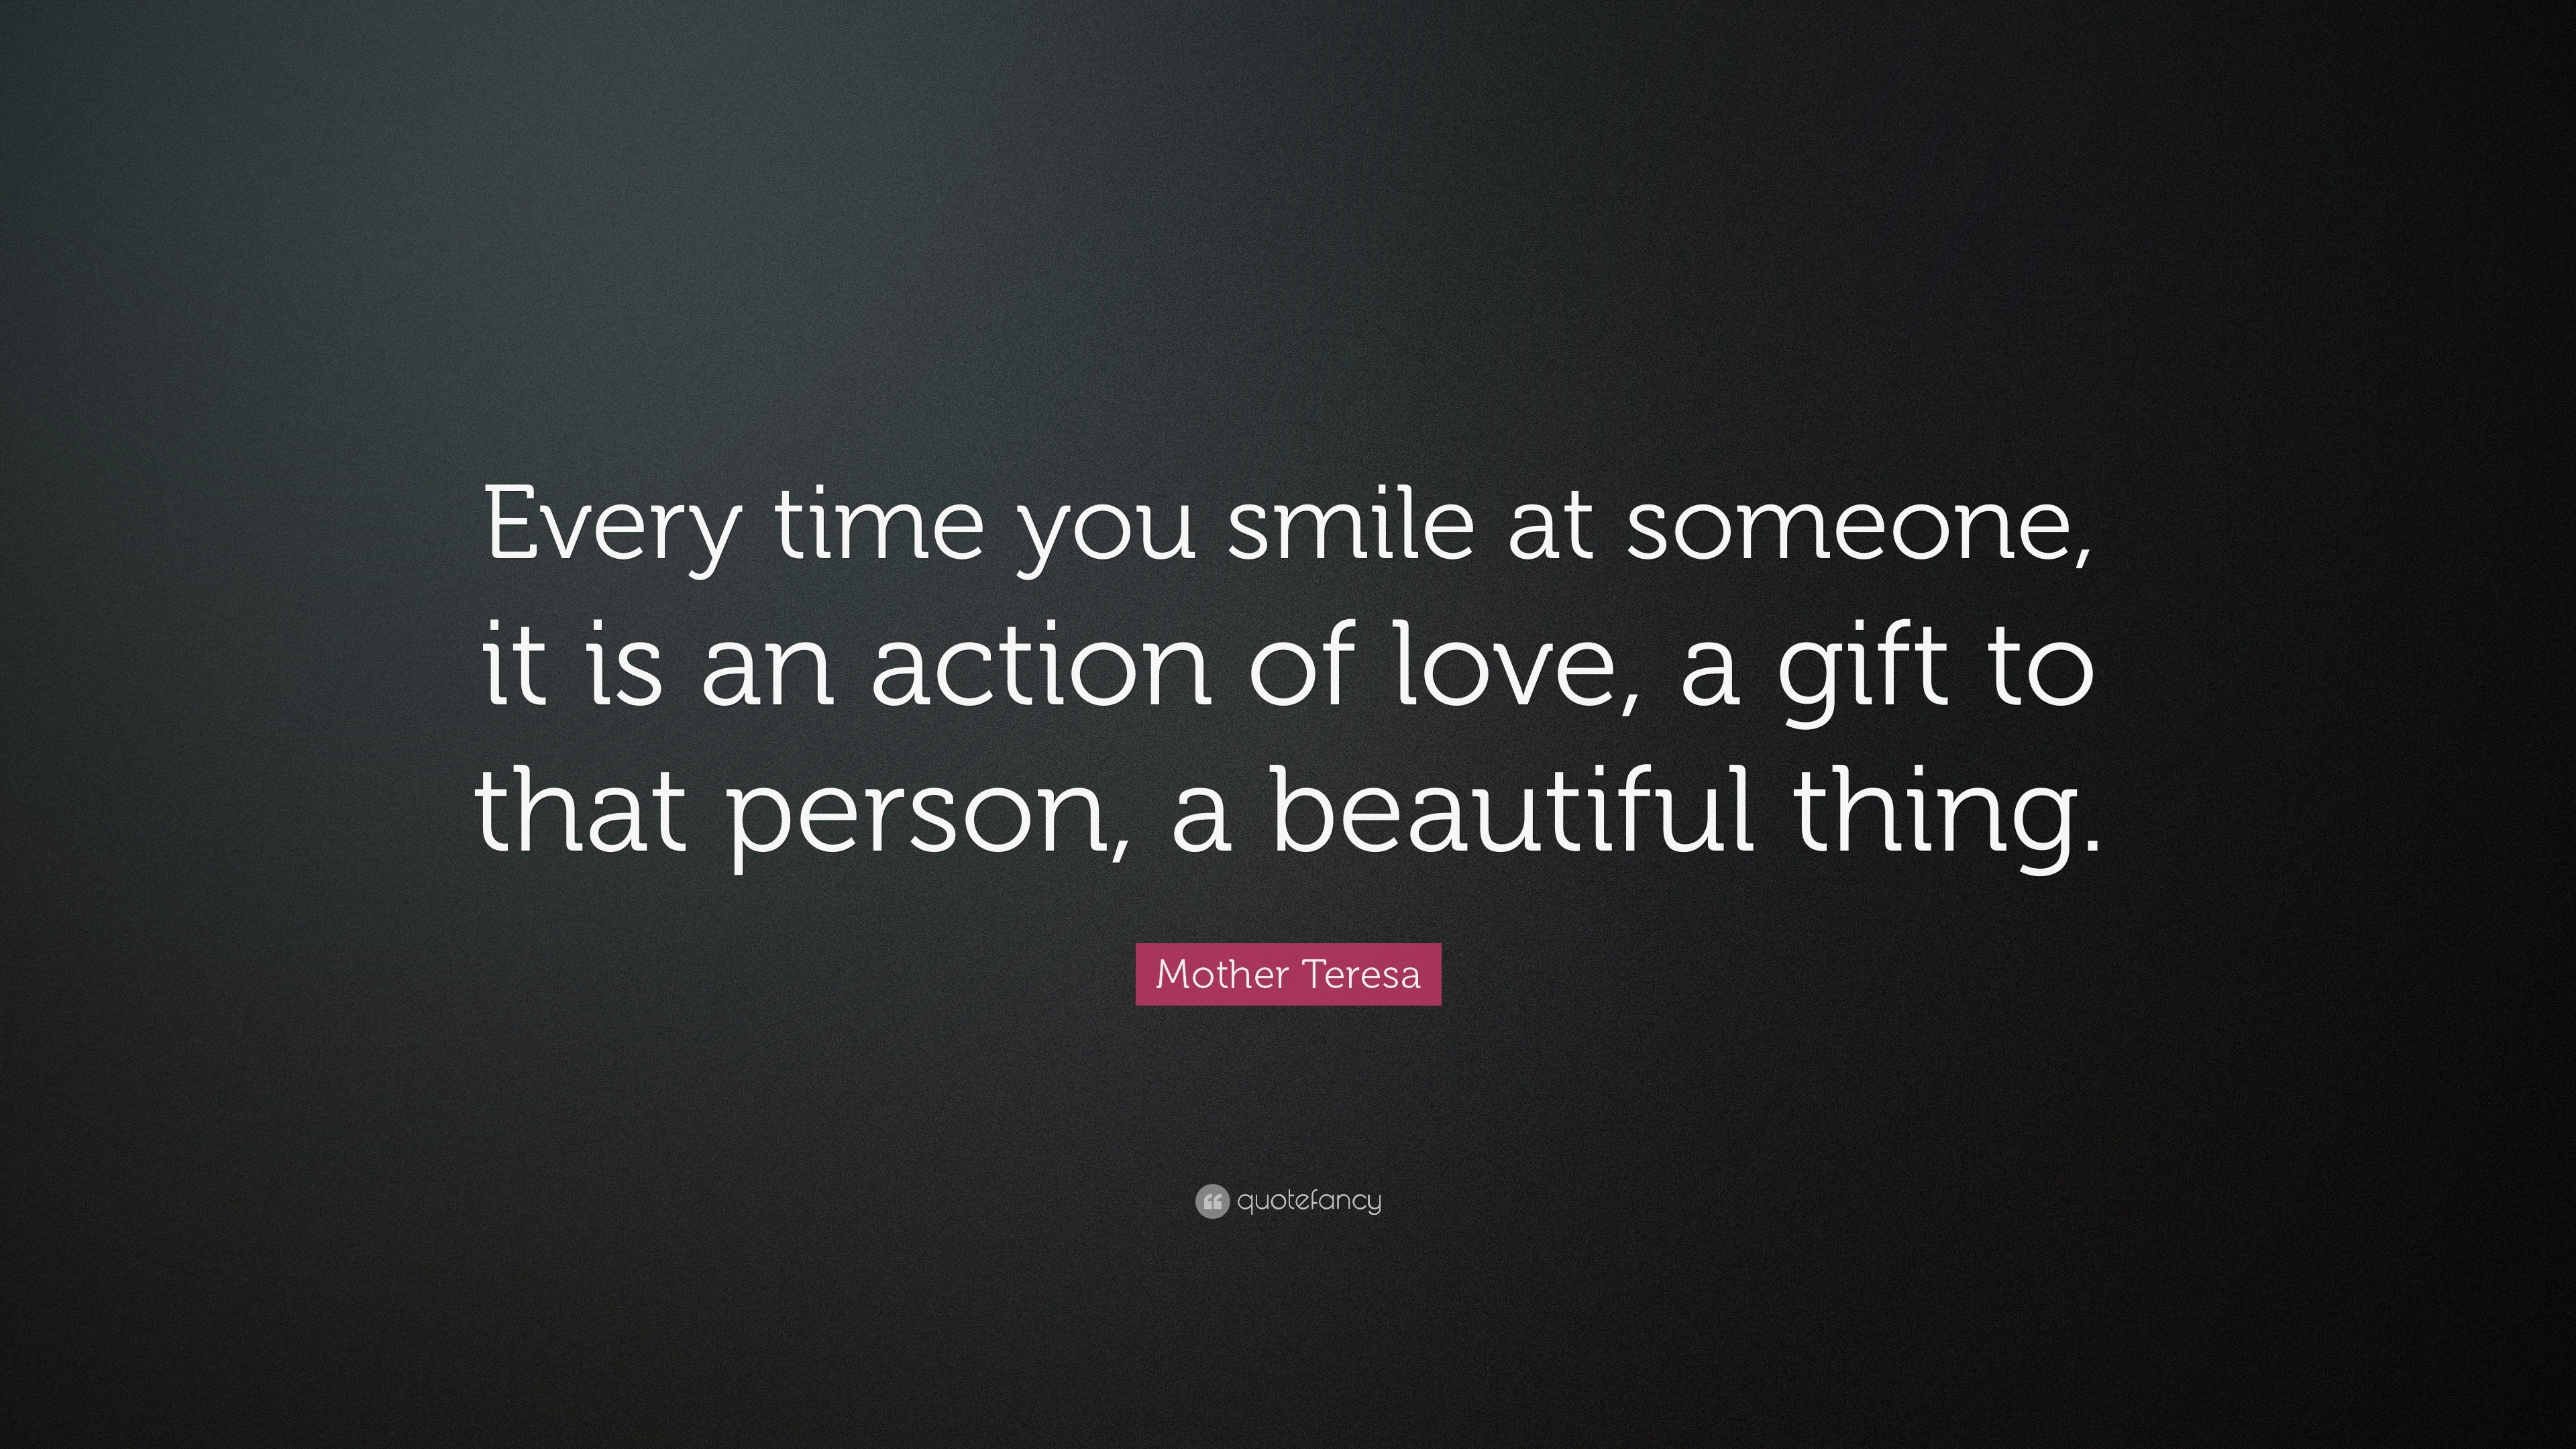 Mother Teresa Quote “Every time you smile at someone it is an action